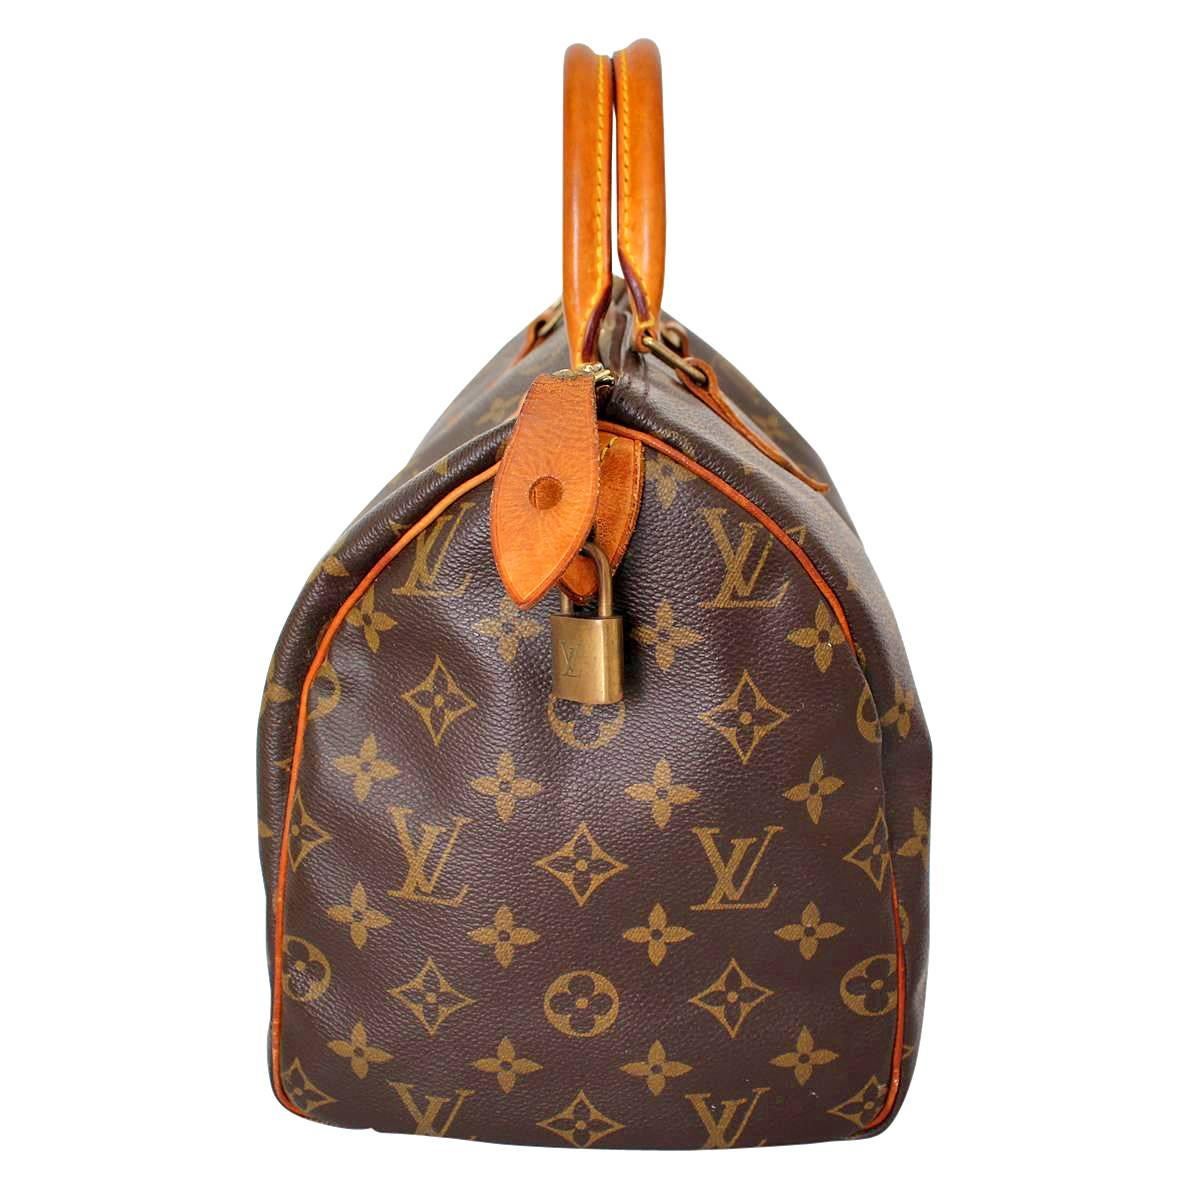 Iconic Louis Vuitton Speedy 30
Monogram canvas
Leather handles
Zip closure
Internal pocket
Key locker without keys
Cm 30 x 22 x 17 (11.8 x 8.6 x 6.7 inches)
Year 2005
Worldwide express shipping included in the price !